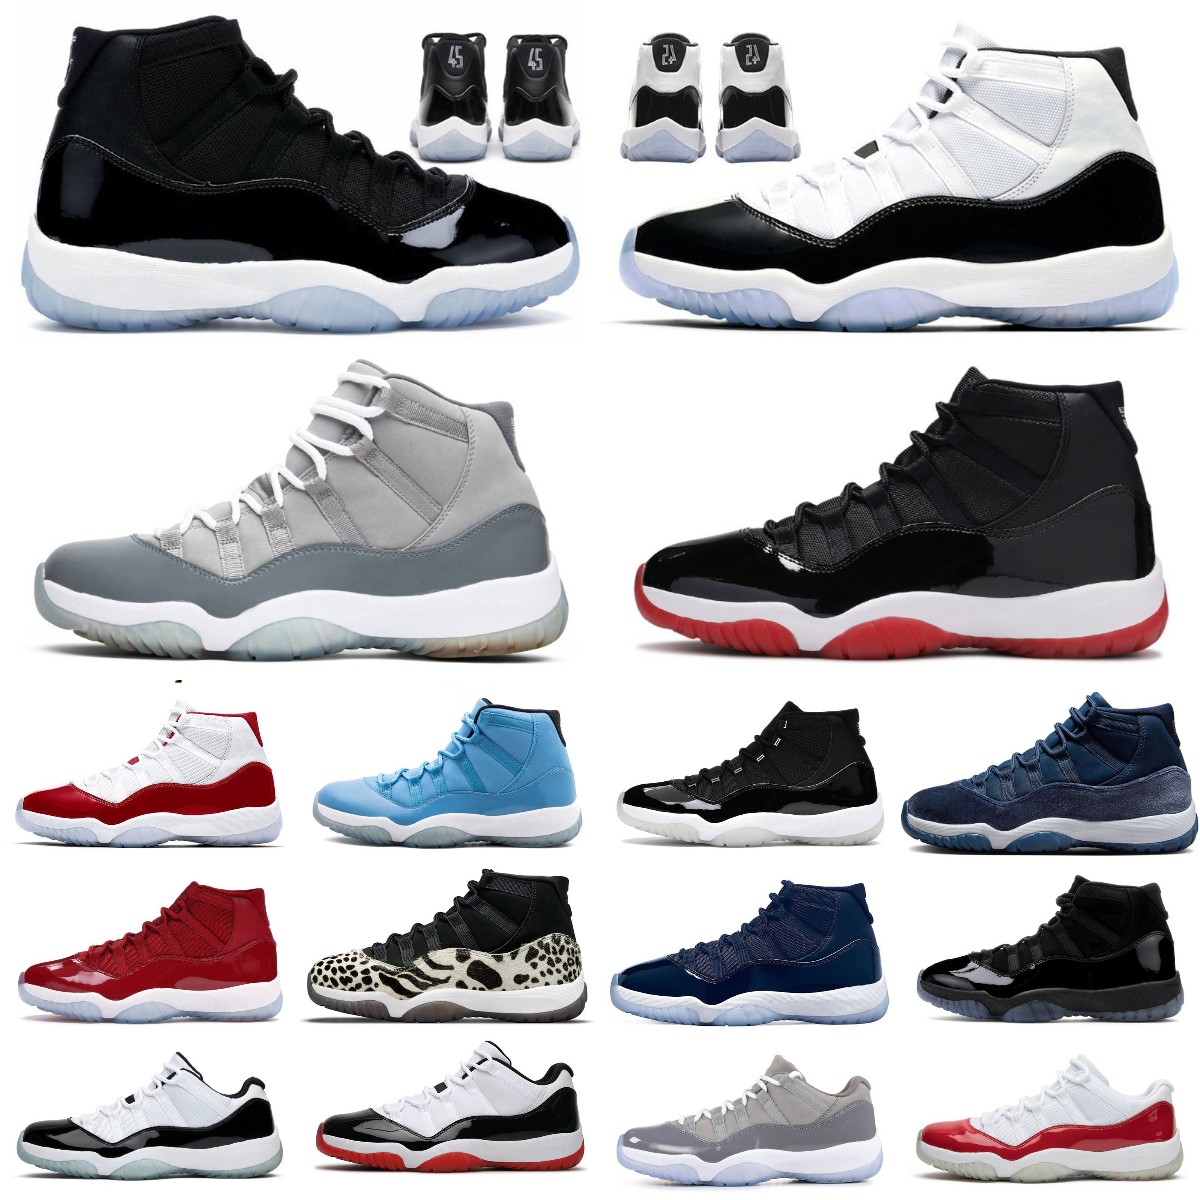 2023 NEW 11 11S Mens Basketball Shoes Low Women Concord Cool Grey Cap Gown Red Legend Blue Space Jam Win Like 96 82 Unc Jubilee Bred Tint 72-10 Sports Sneakers Trainers